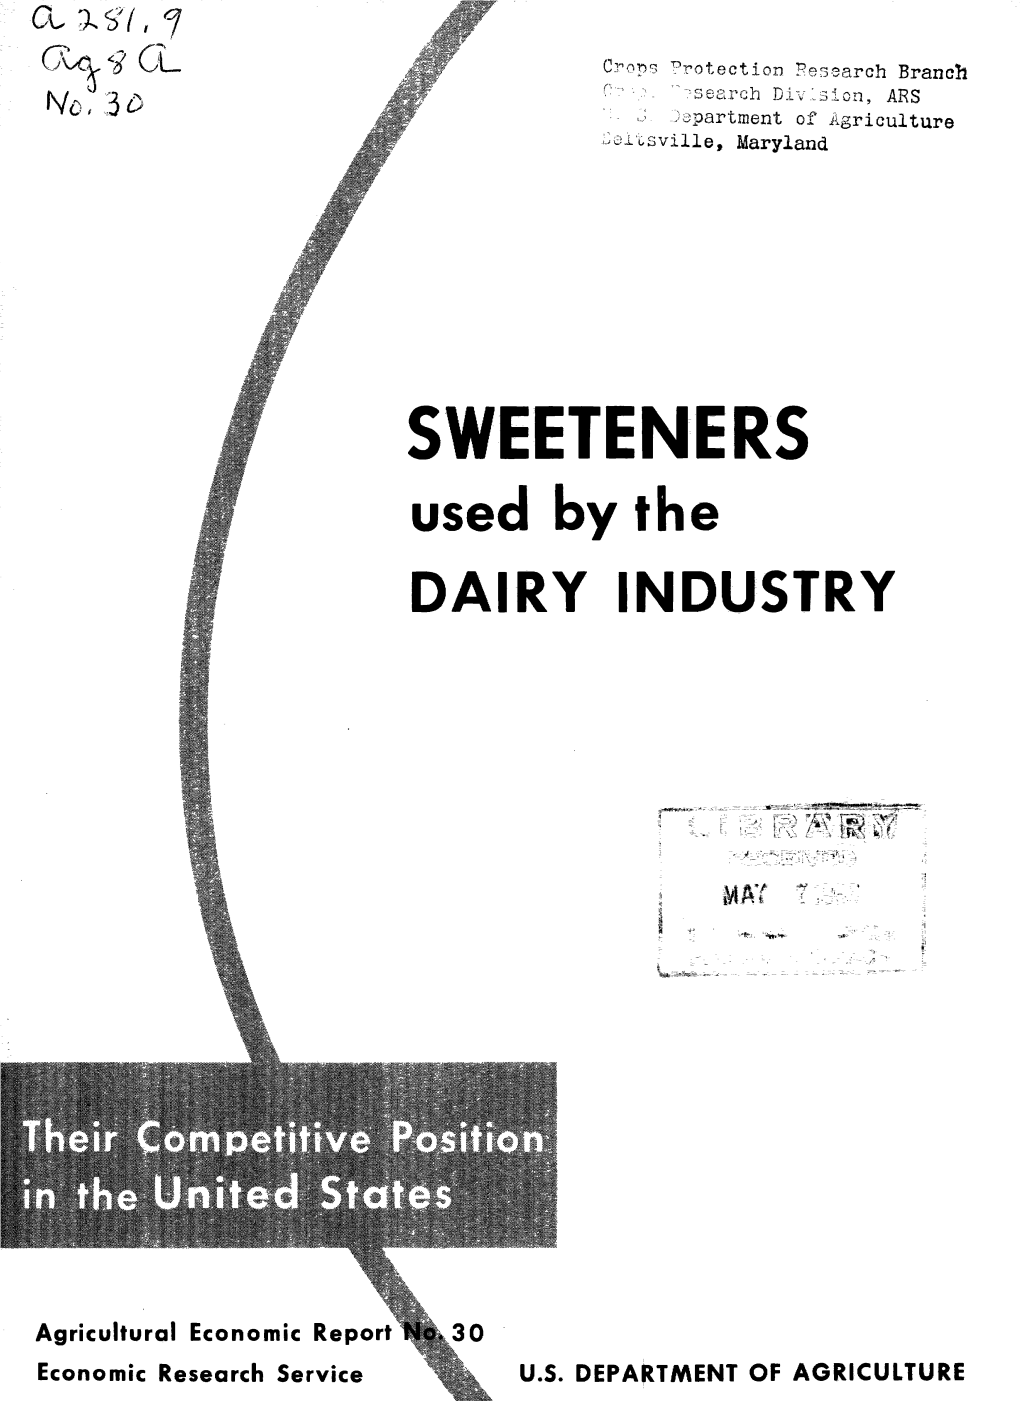 SWEETENERS Used by the DAIRY INDUSTRY